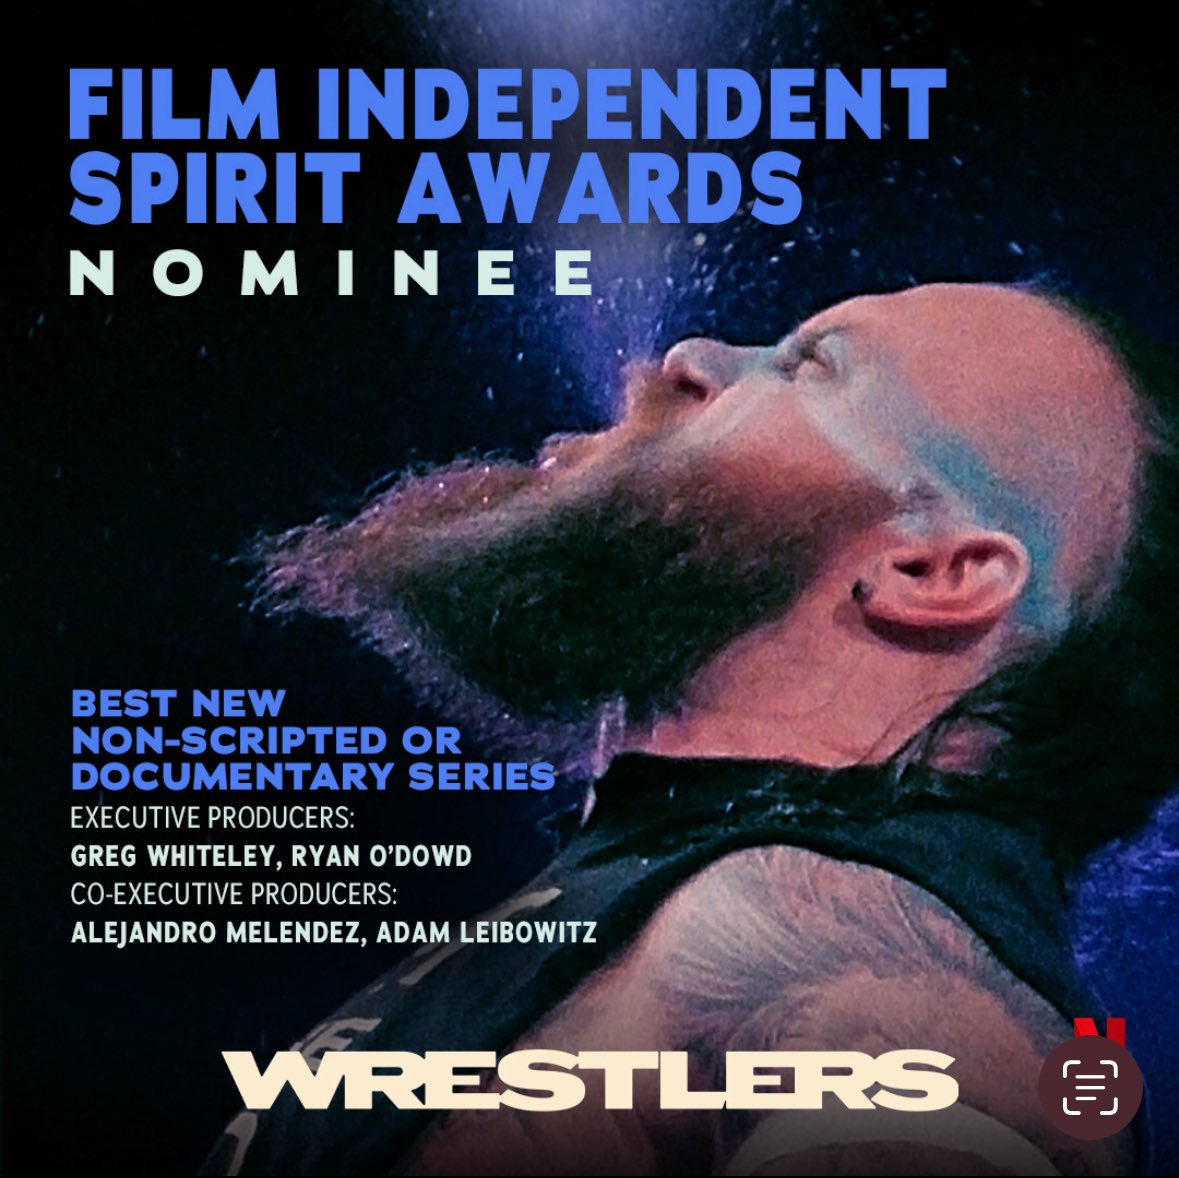 Excited about our nomination for “Wrestlers” at the Independent Spirit Awards. #netflixseries #WrestlersNetflix #netflix